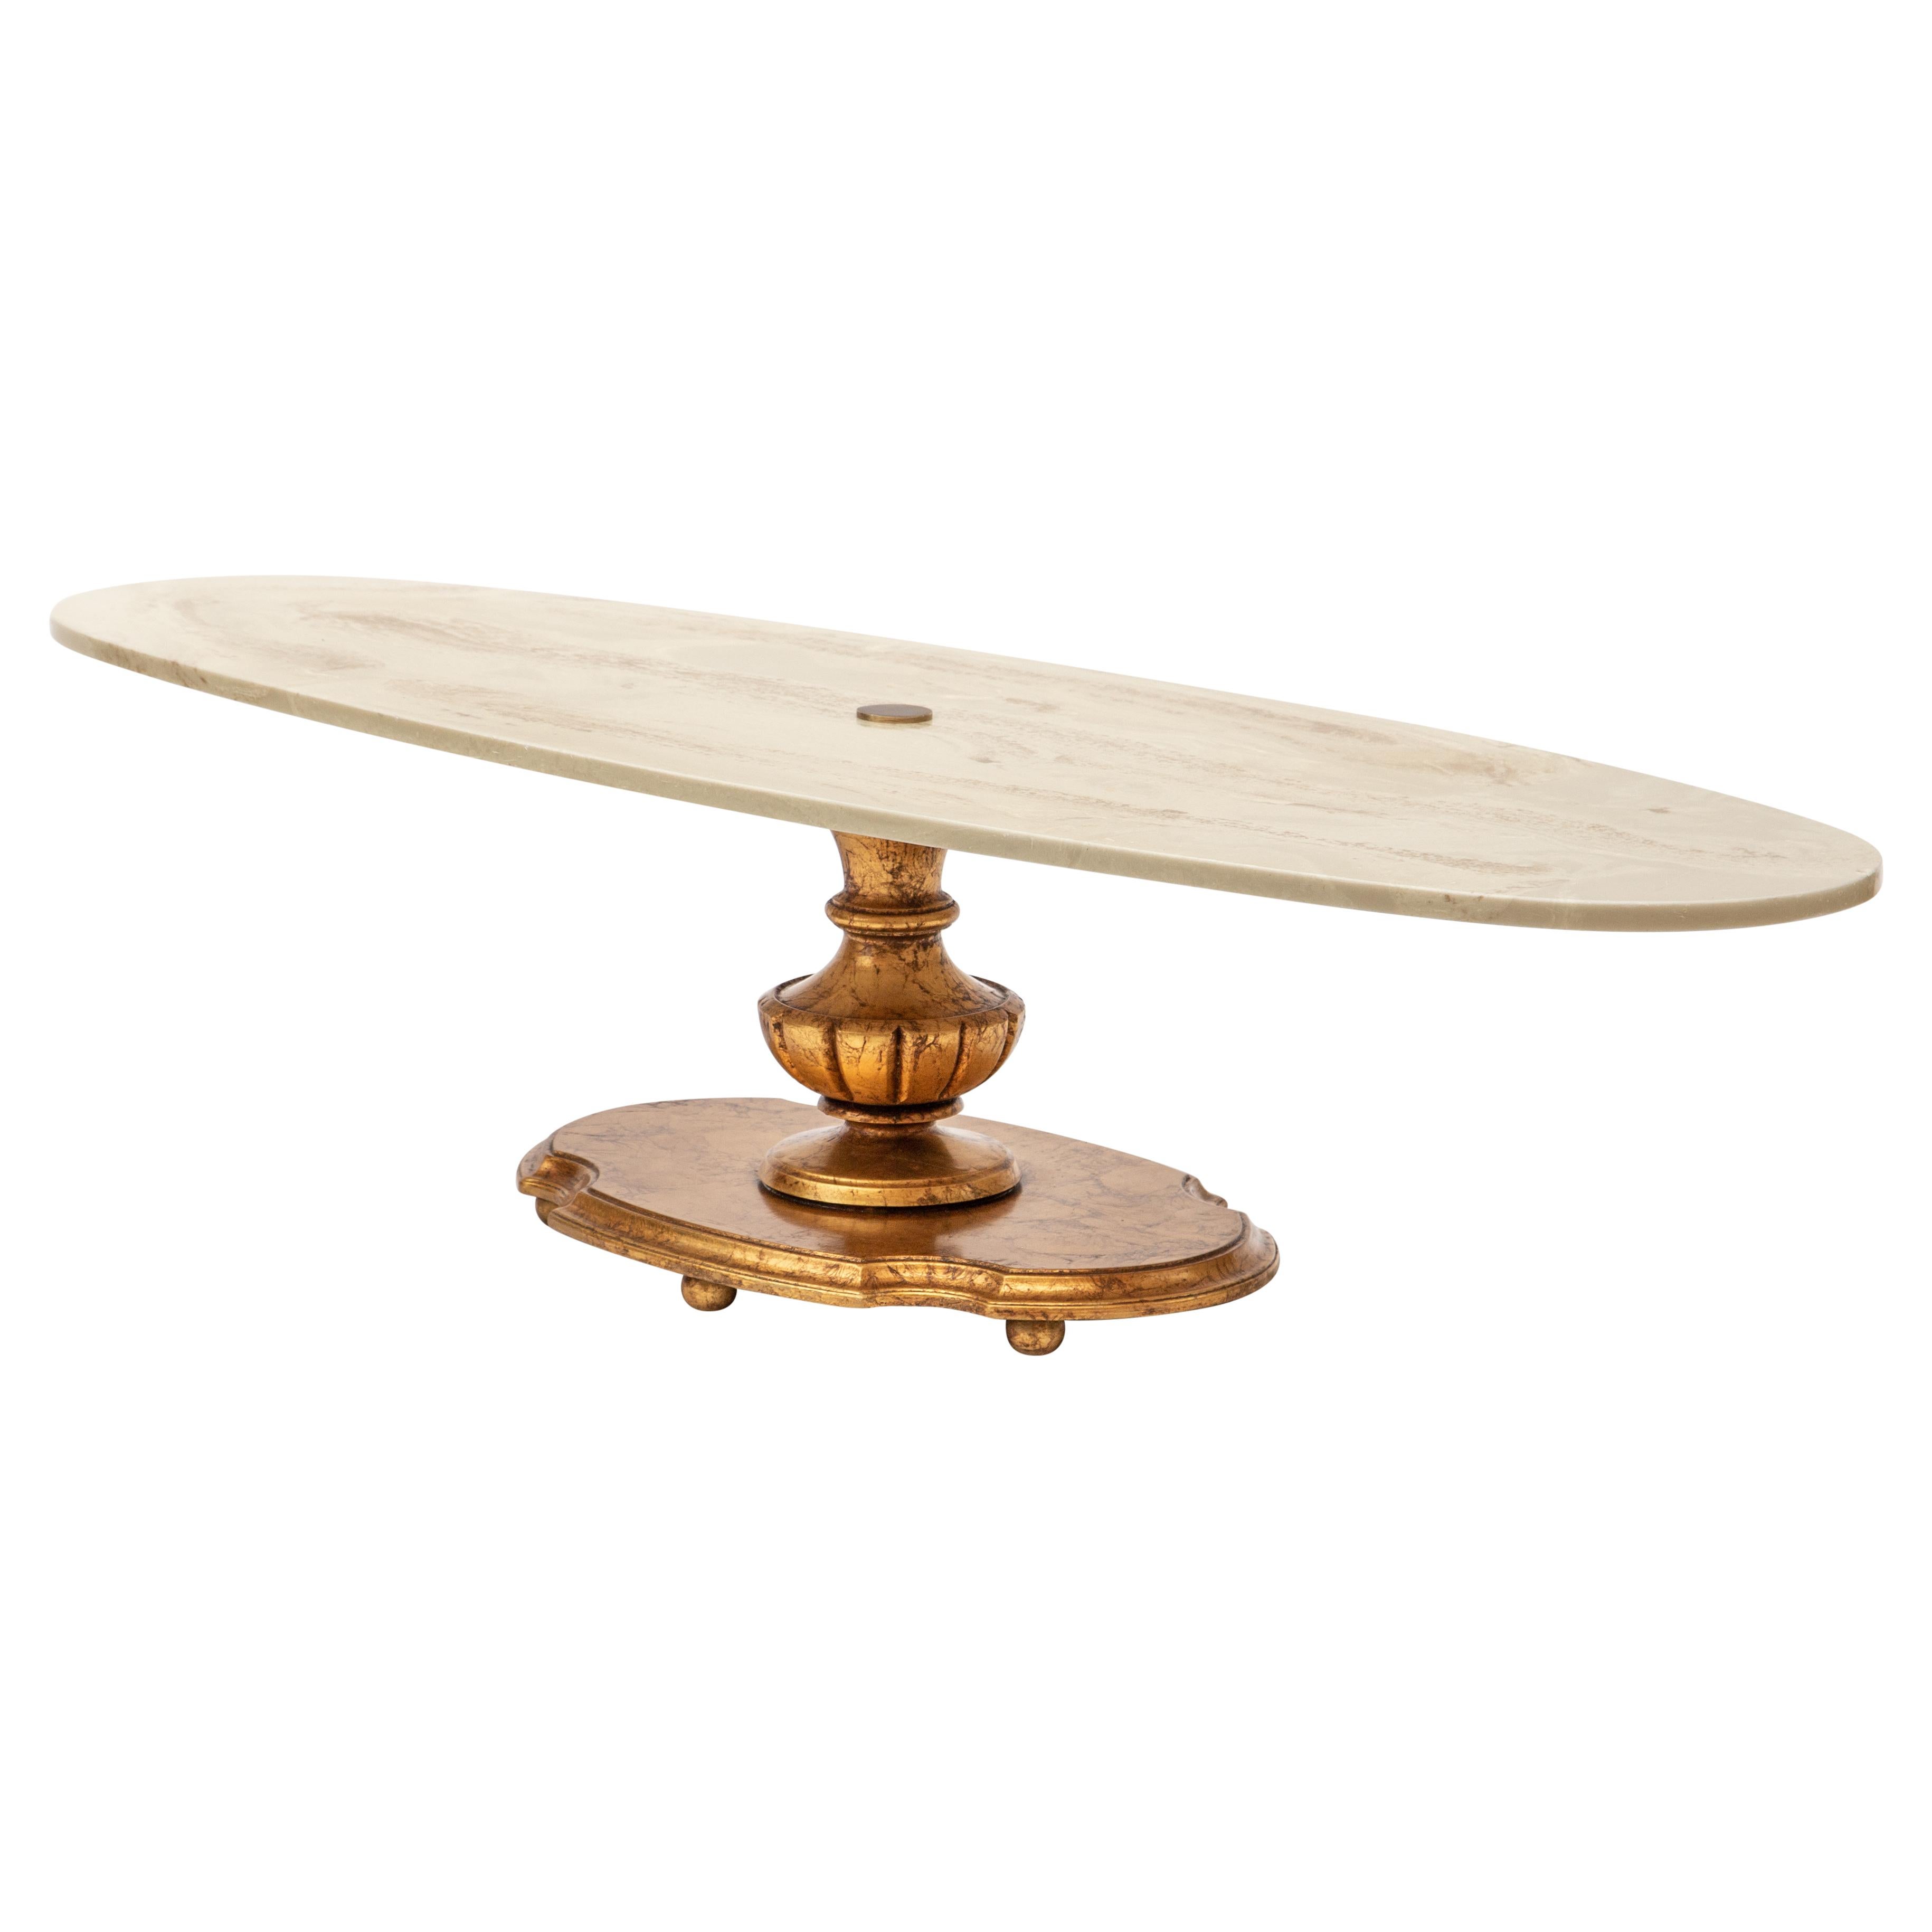 20th Century Giltwood Pedestal Coffee Table with Oval Faux-Marble Top